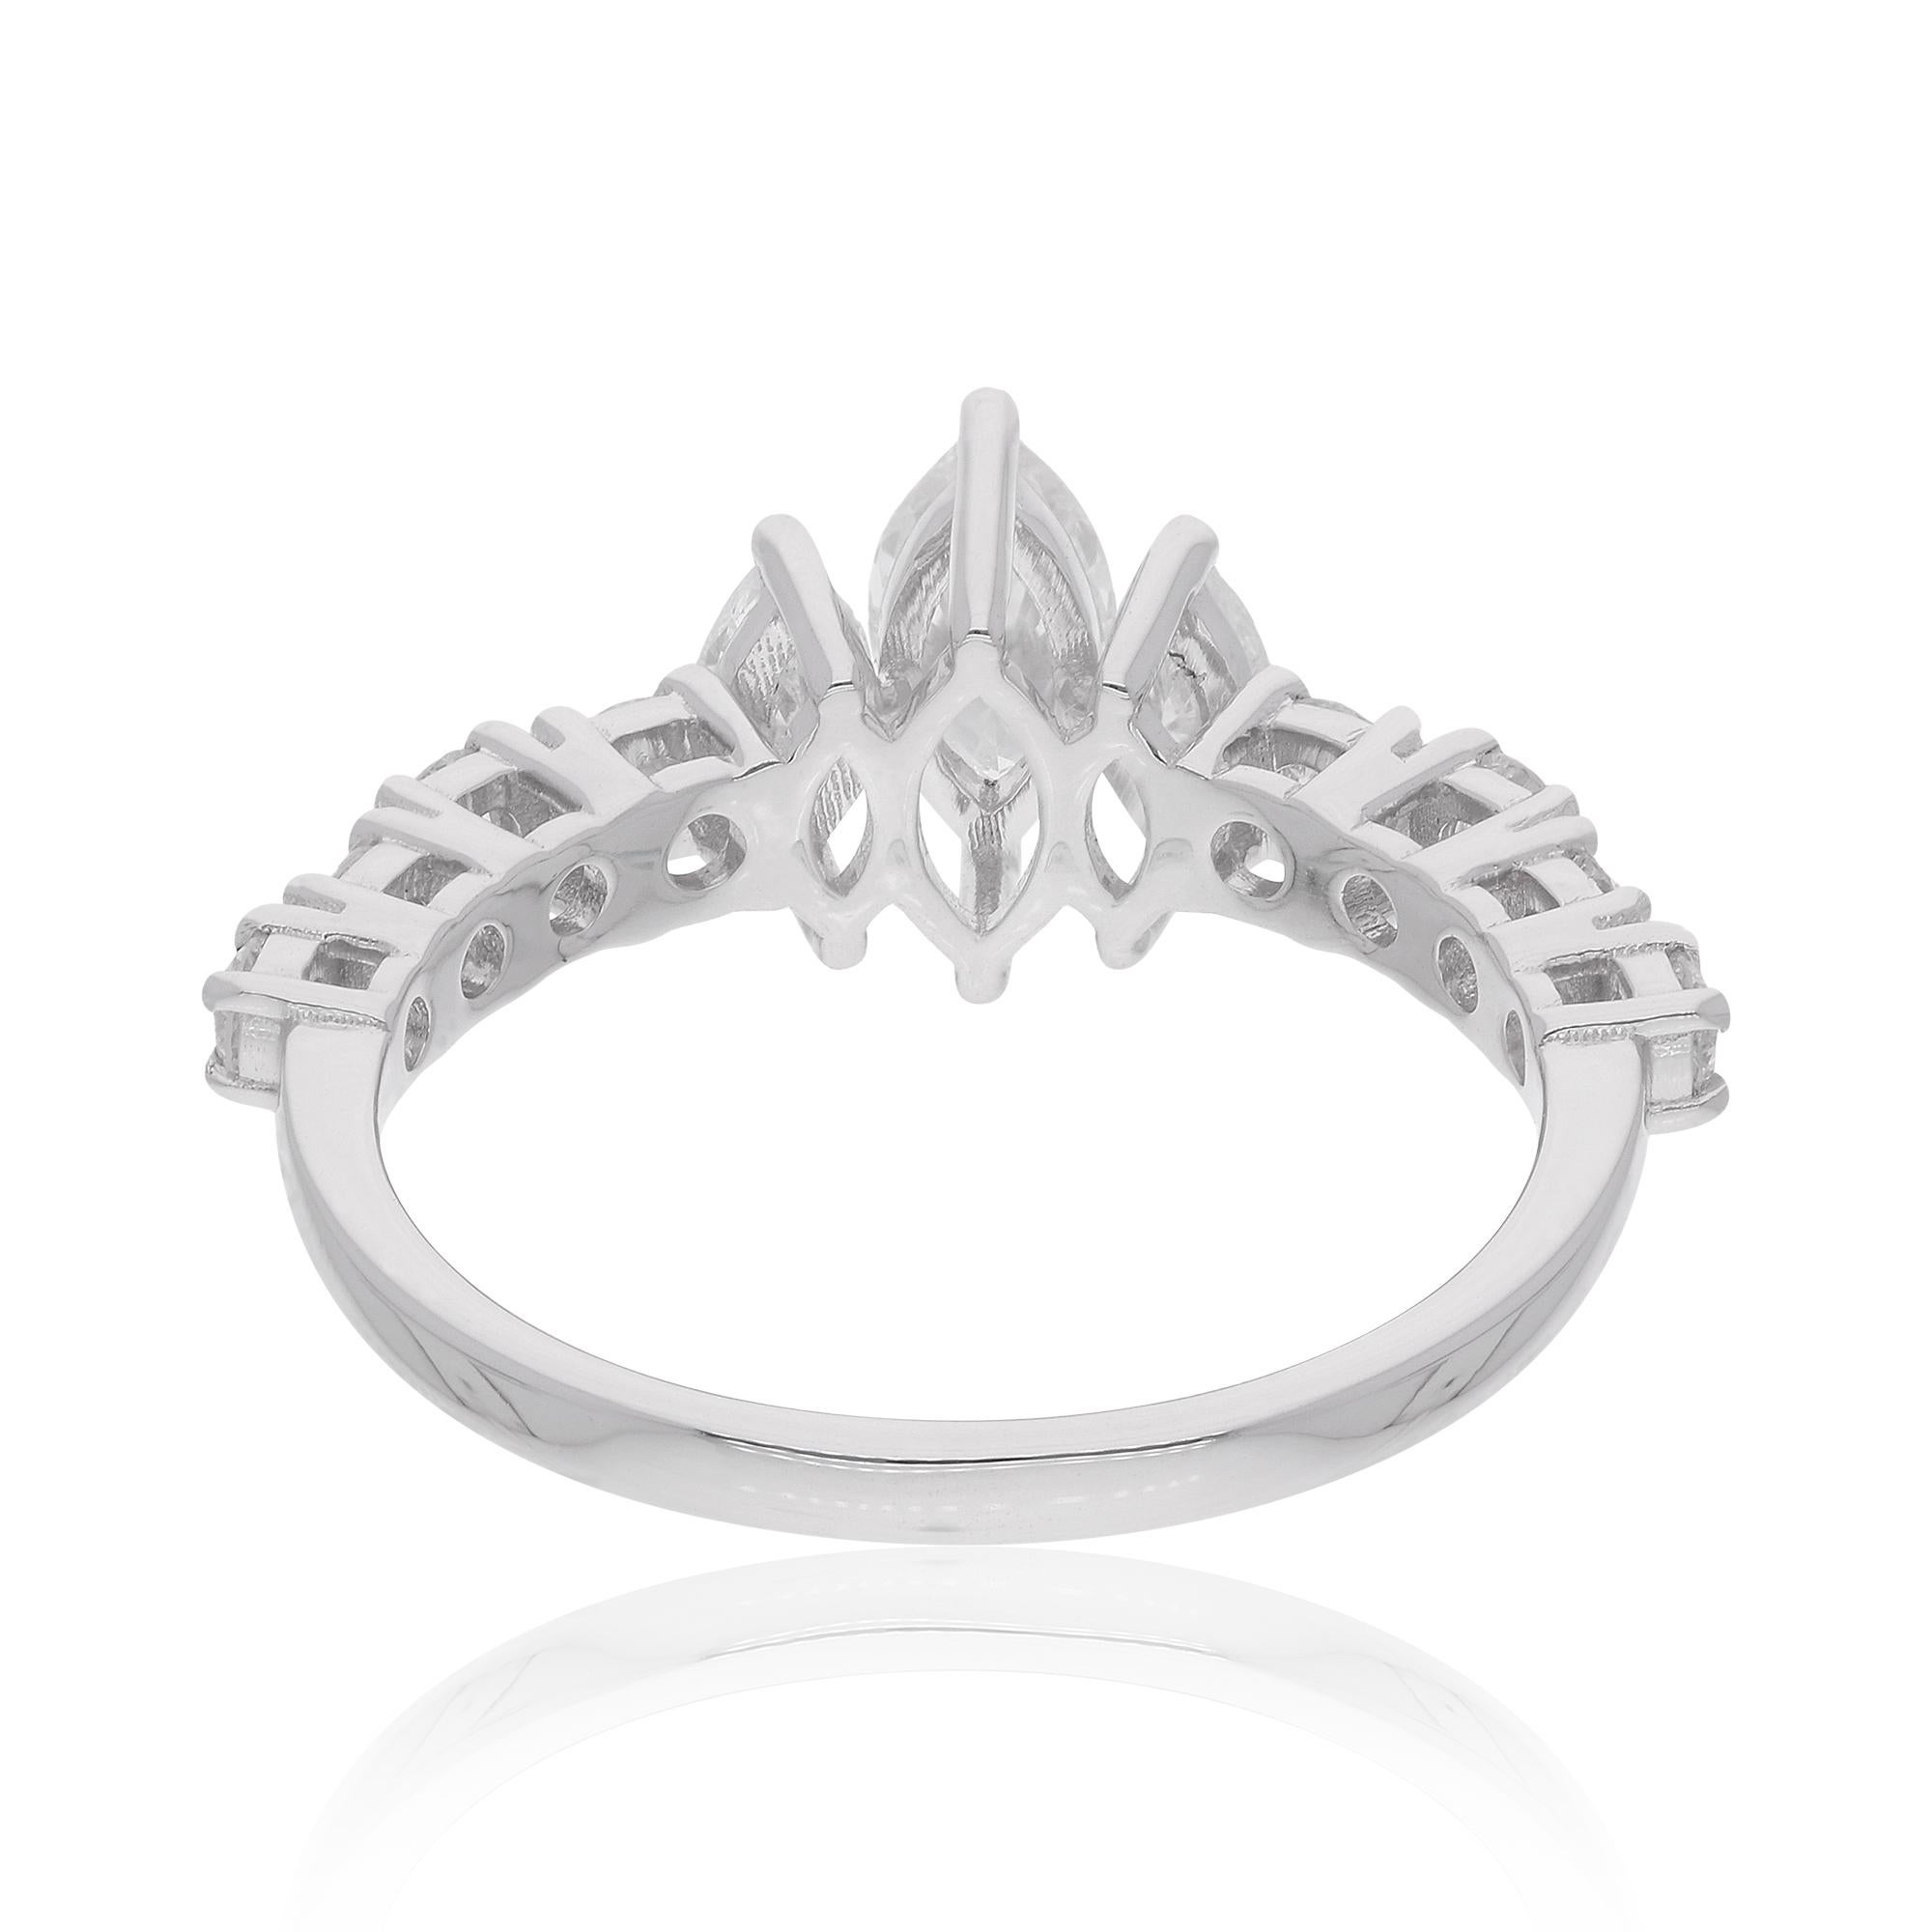 A handmade ring featuring a 1.02 carat marquise and round diamonds in 18 karat white gold is a beautiful and unique piece of fine jewelry. The ring typically showcases a combination of a marquise-shaped diamond and round diamonds.

Item Code :-